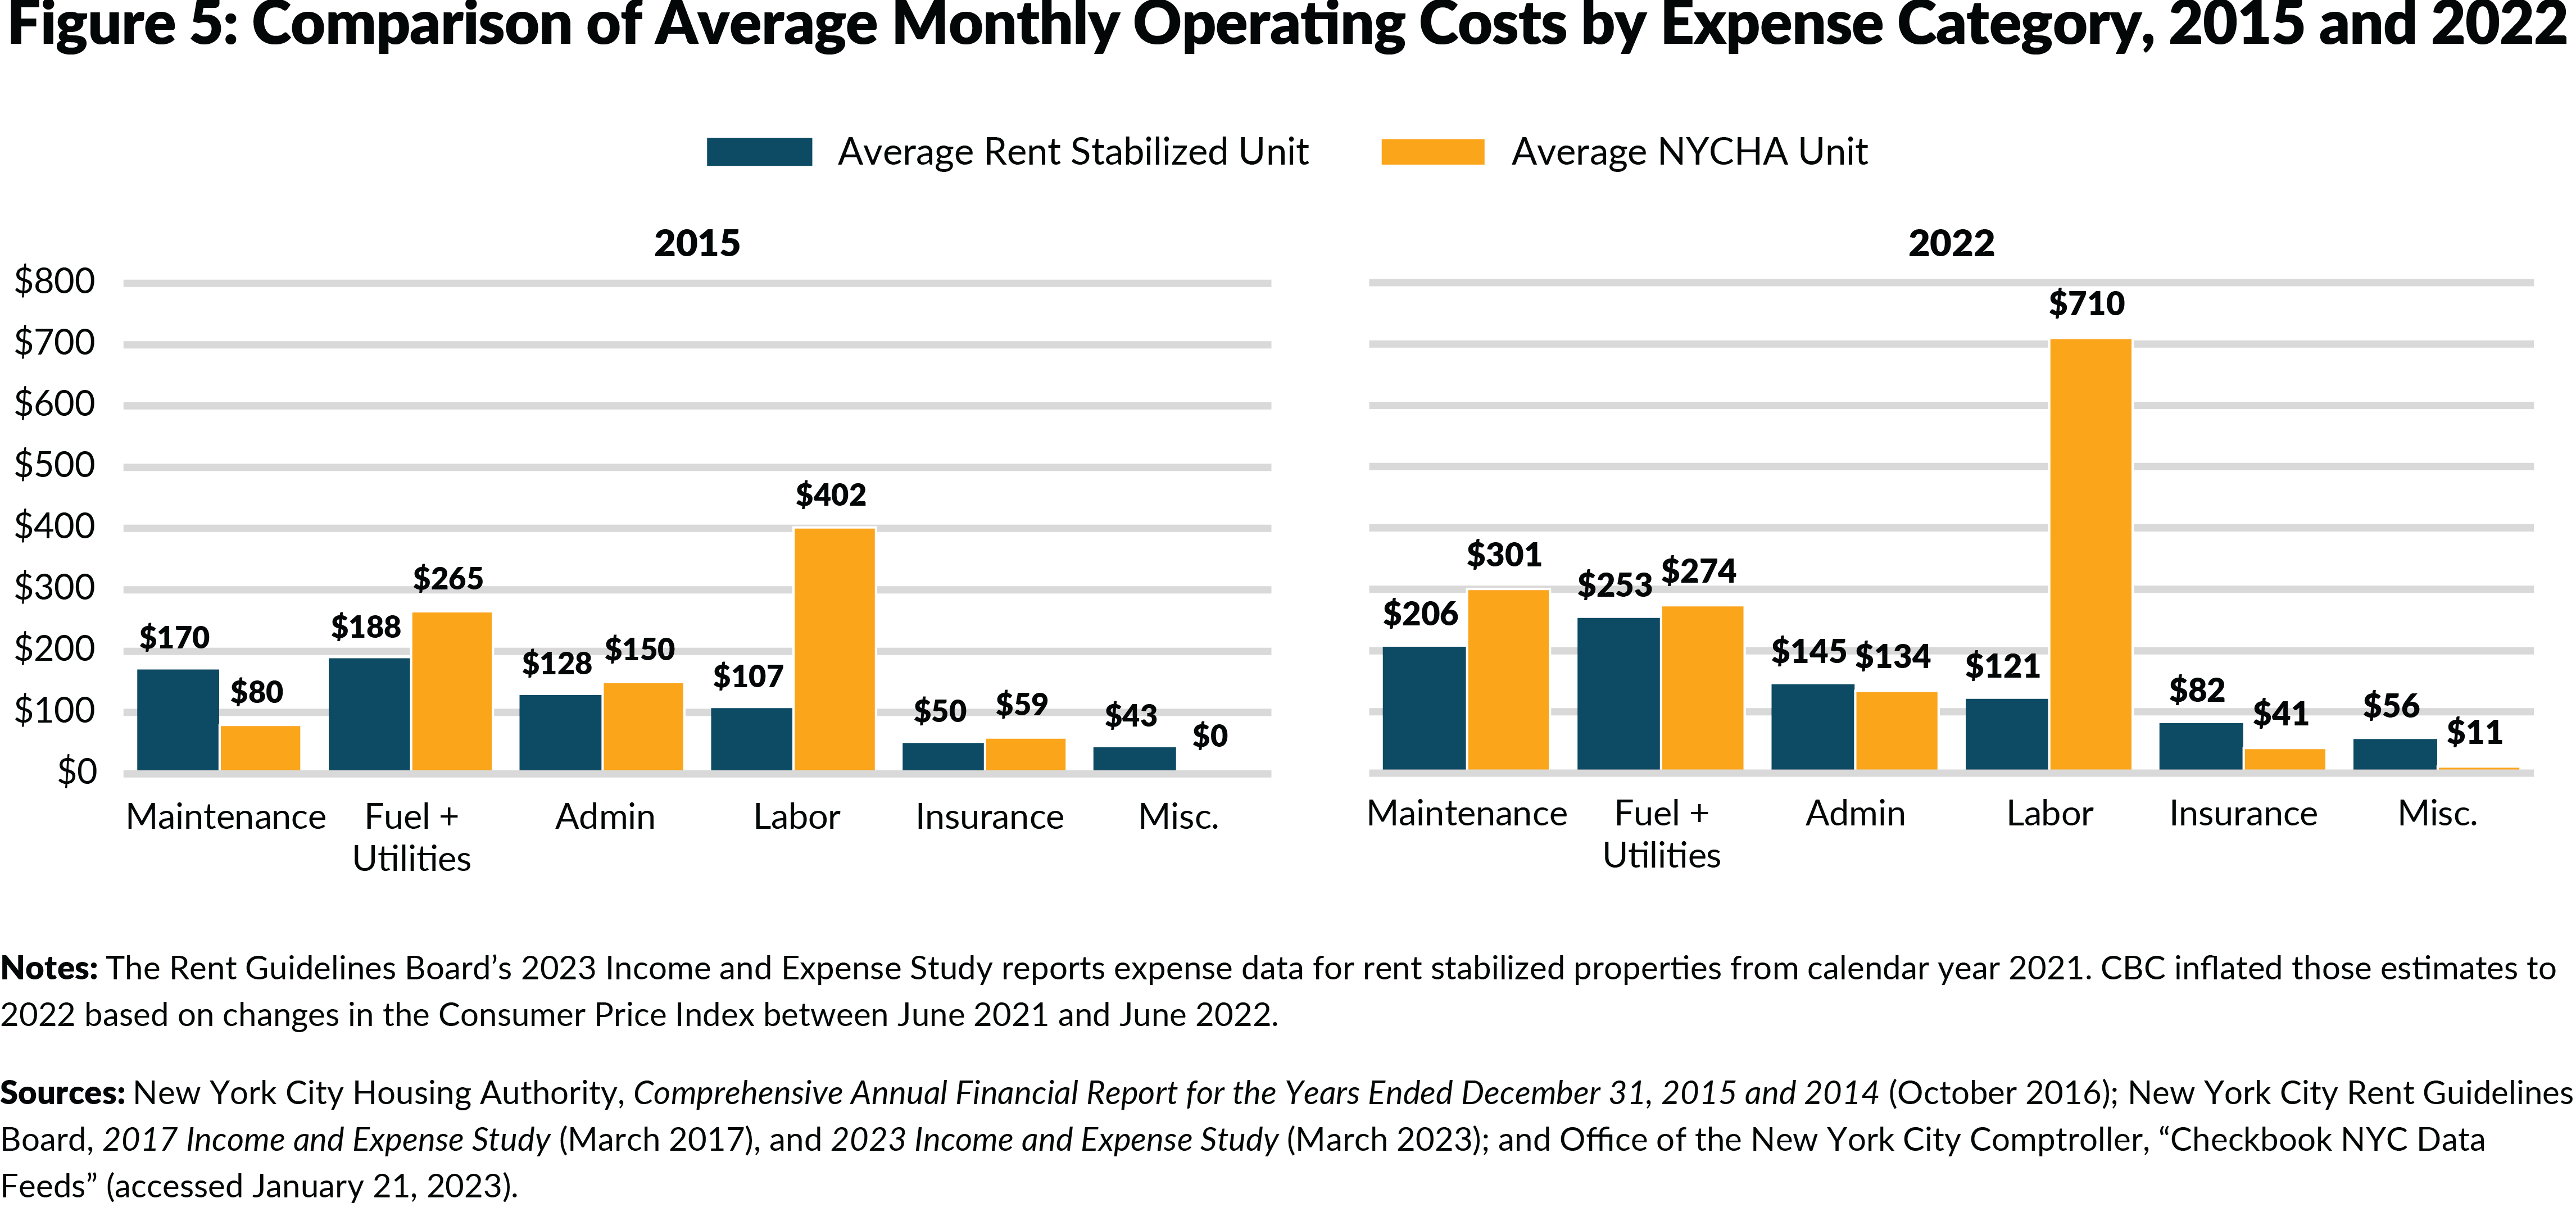 Figure 5: Comparison of Average Monthly Operating Costs by Expense Category, 2015 and 2022